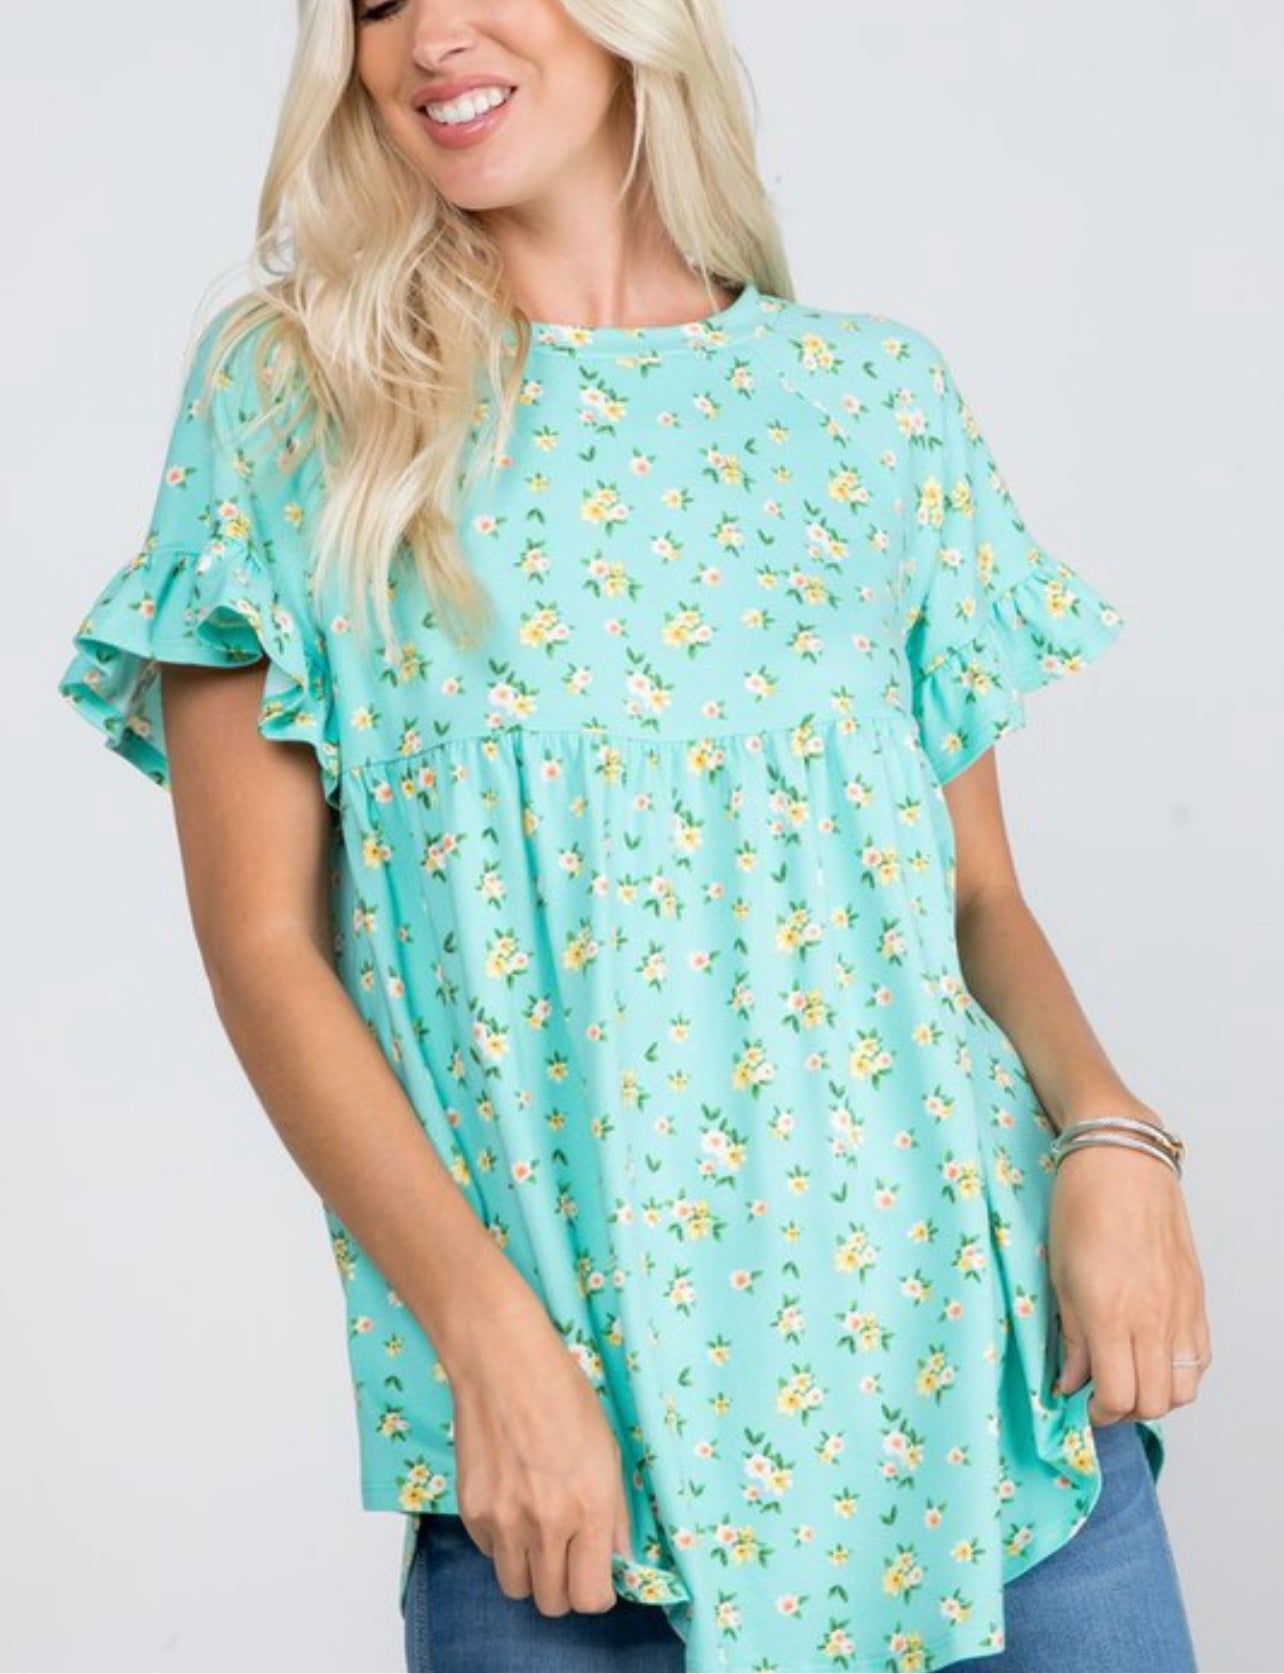 Product details Floral Printed  Ruffled sleeves Round neckline Baby doll style straight hem at bottom Fits true to size  *Colors may vary slightly due to monitor resolution and lighting* Southern Bliss Boutique